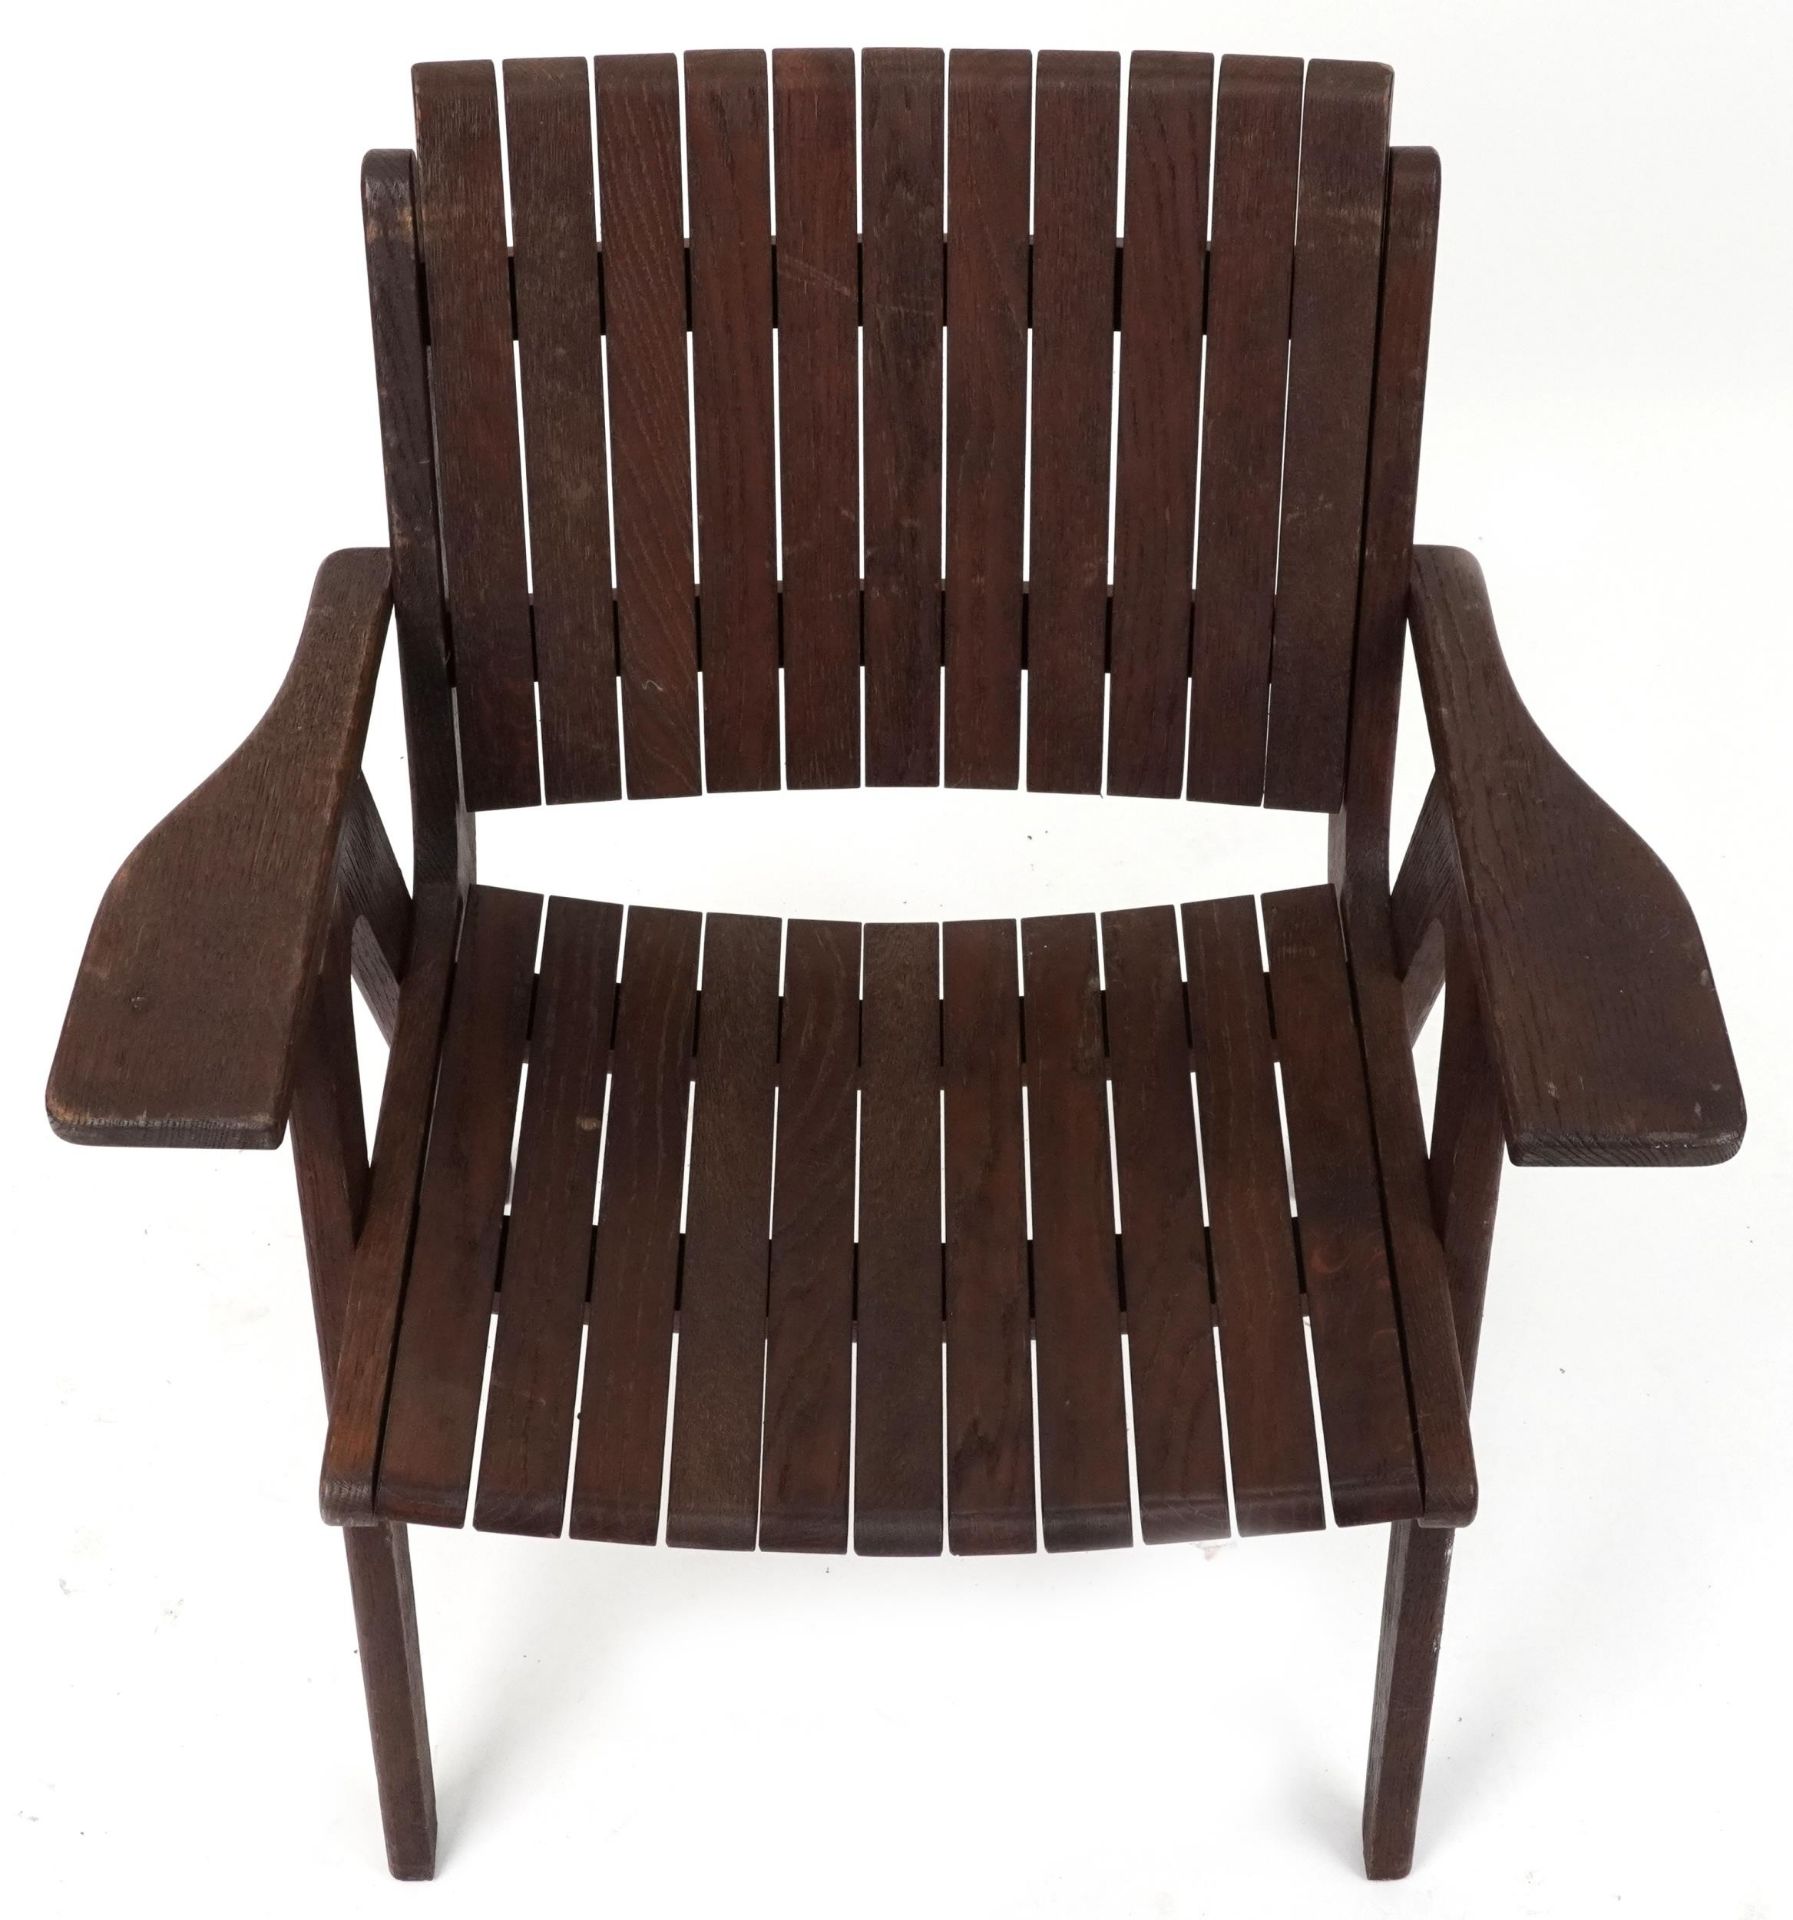 Autoban, stained teak slice chair, 81cm high - Image 3 of 4